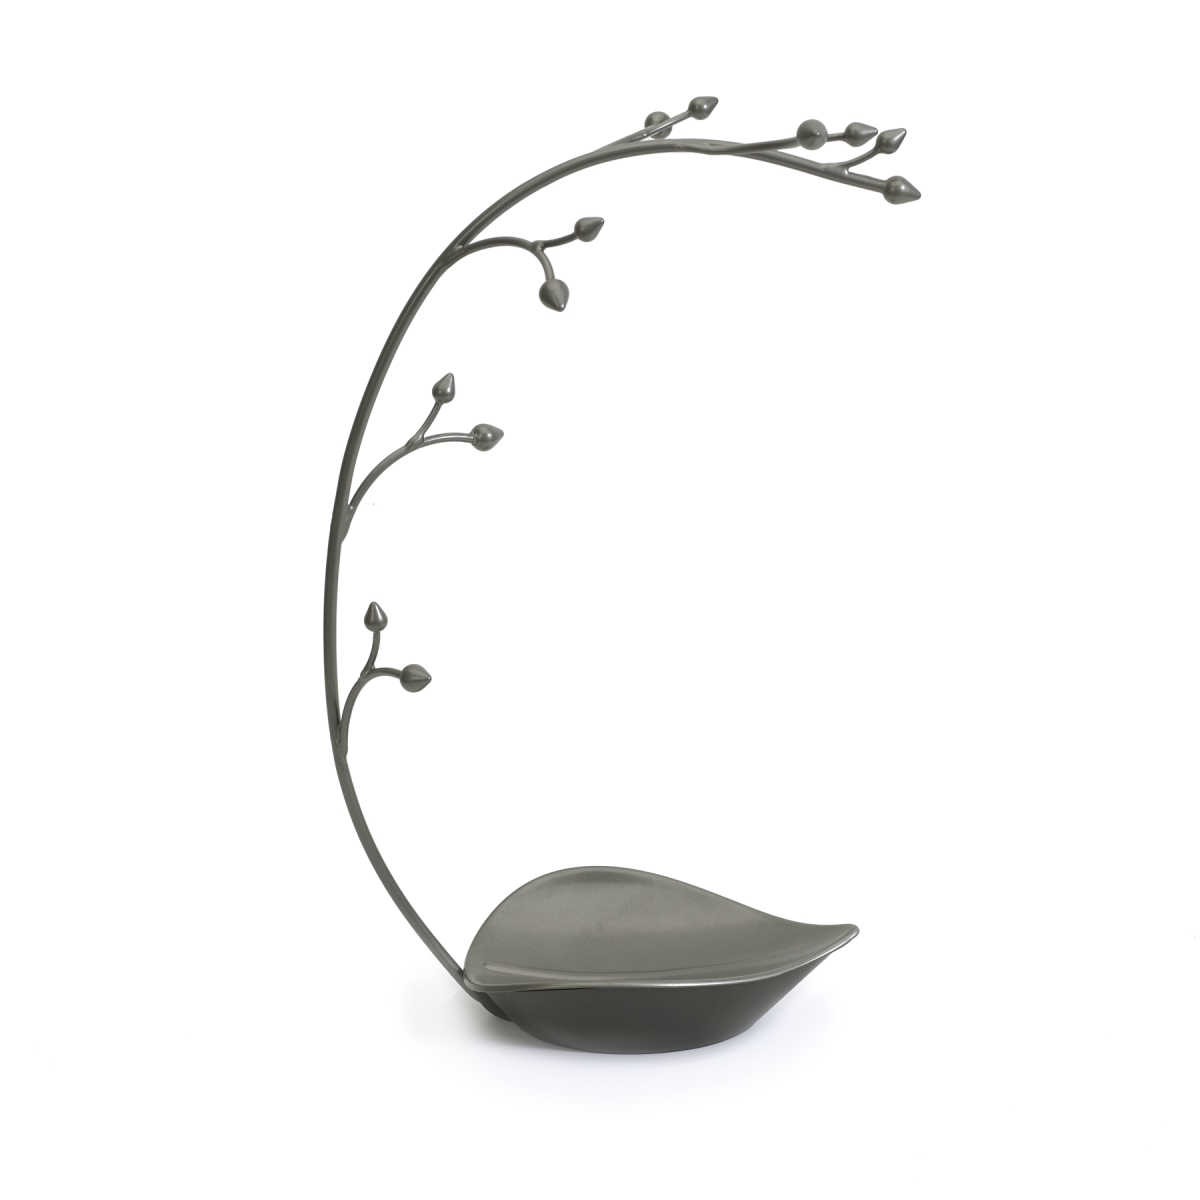 299340-296 Orchid Jewelry Hanging Tree Stand - Gun Metal